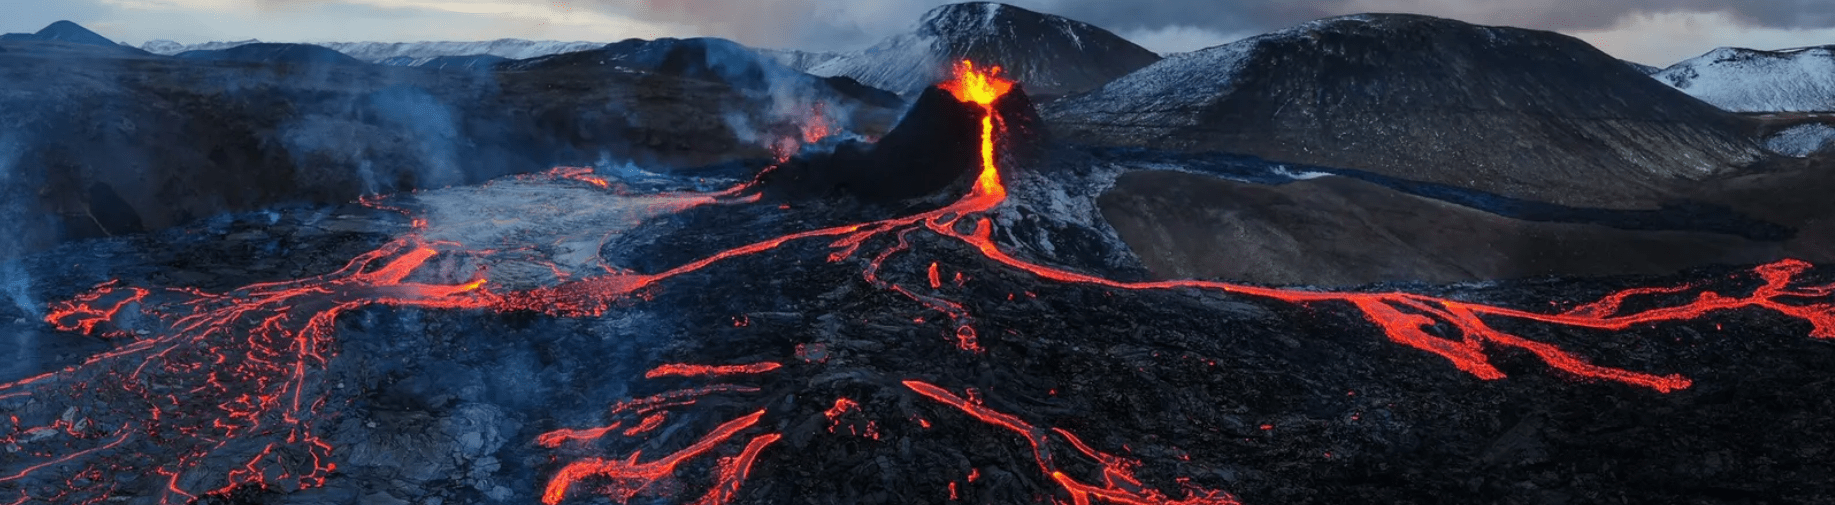 So, like, burning hot lava can’t really hurt you. Right? Welcome to ‘volcano tourism’